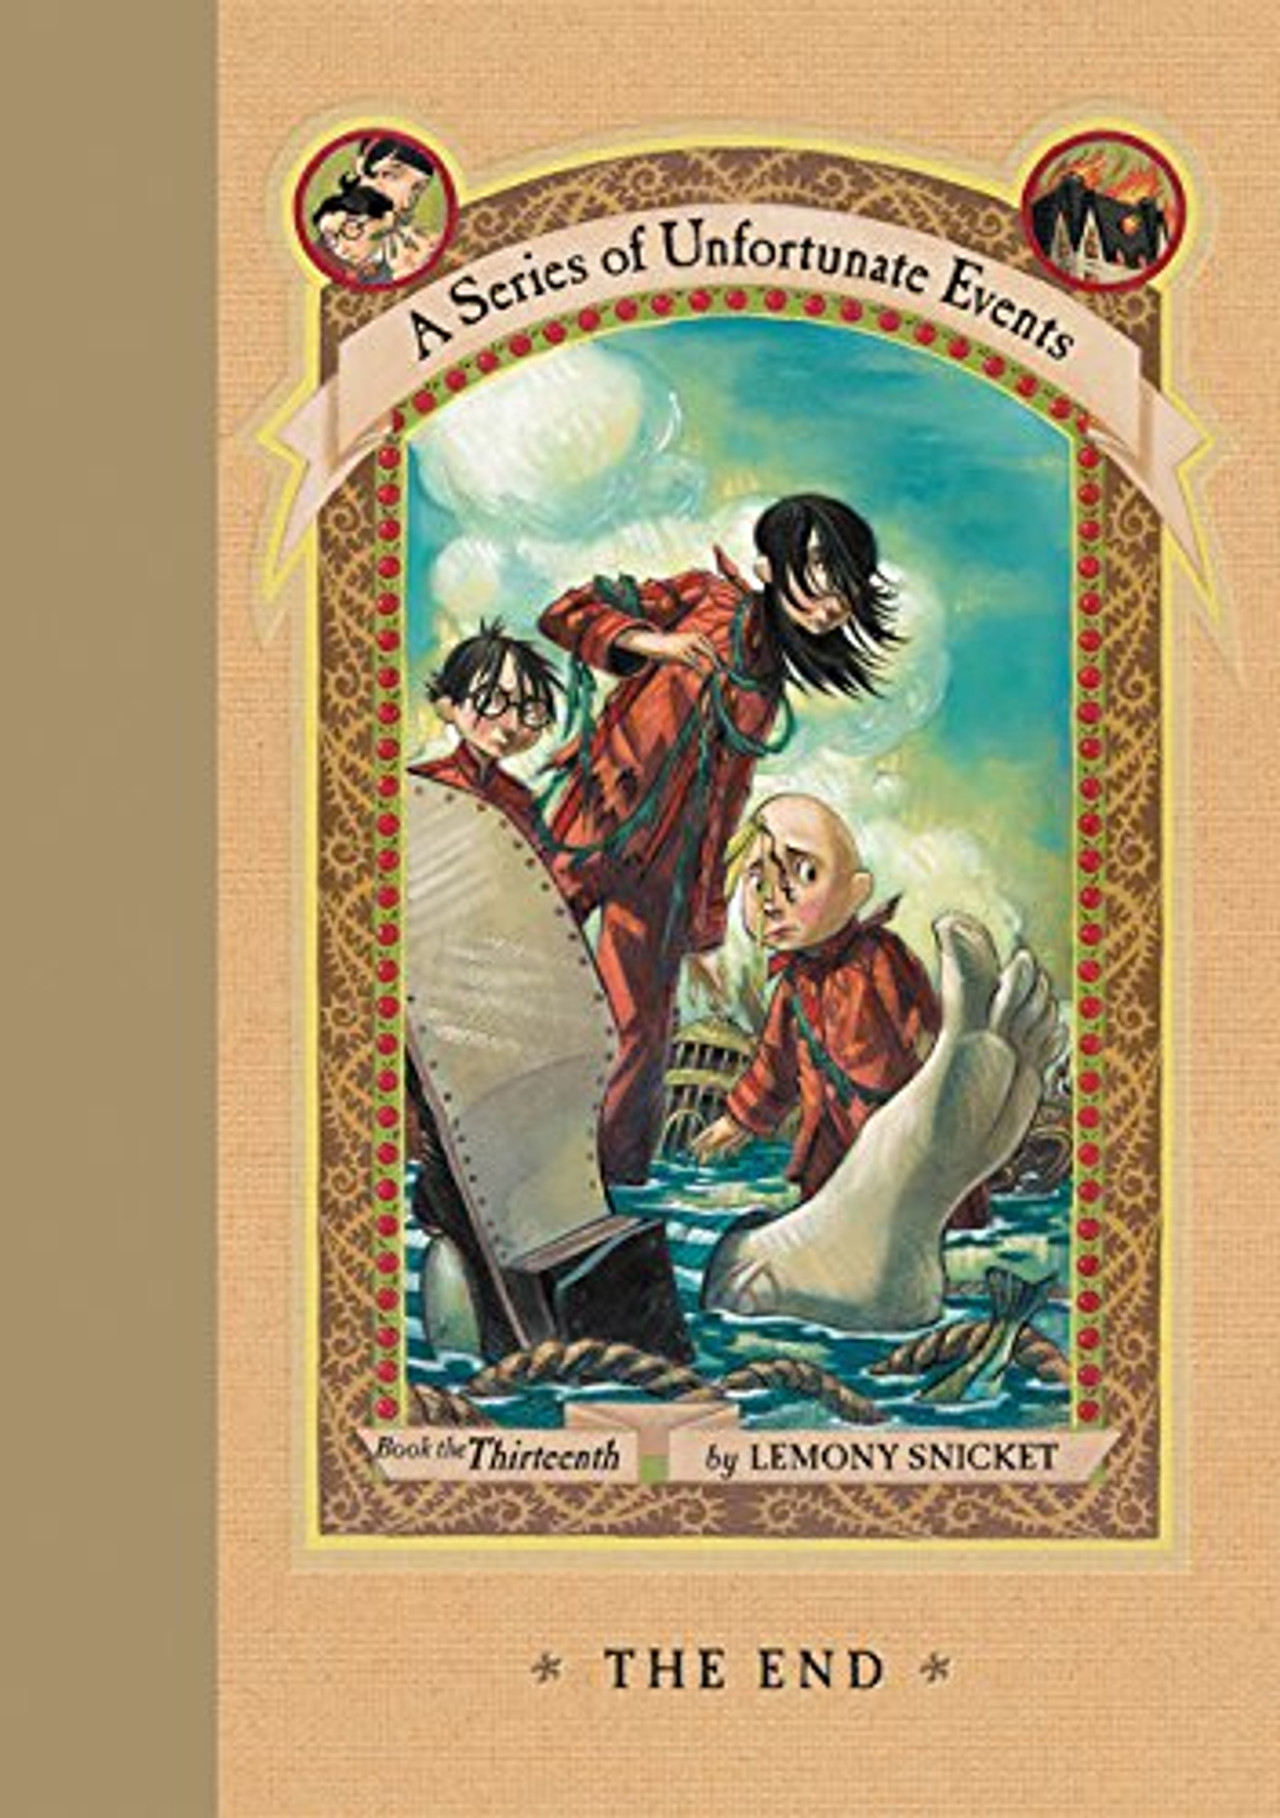 The End (A Series of Unfortunate Events, Book 13) - Lemony Snicket ...